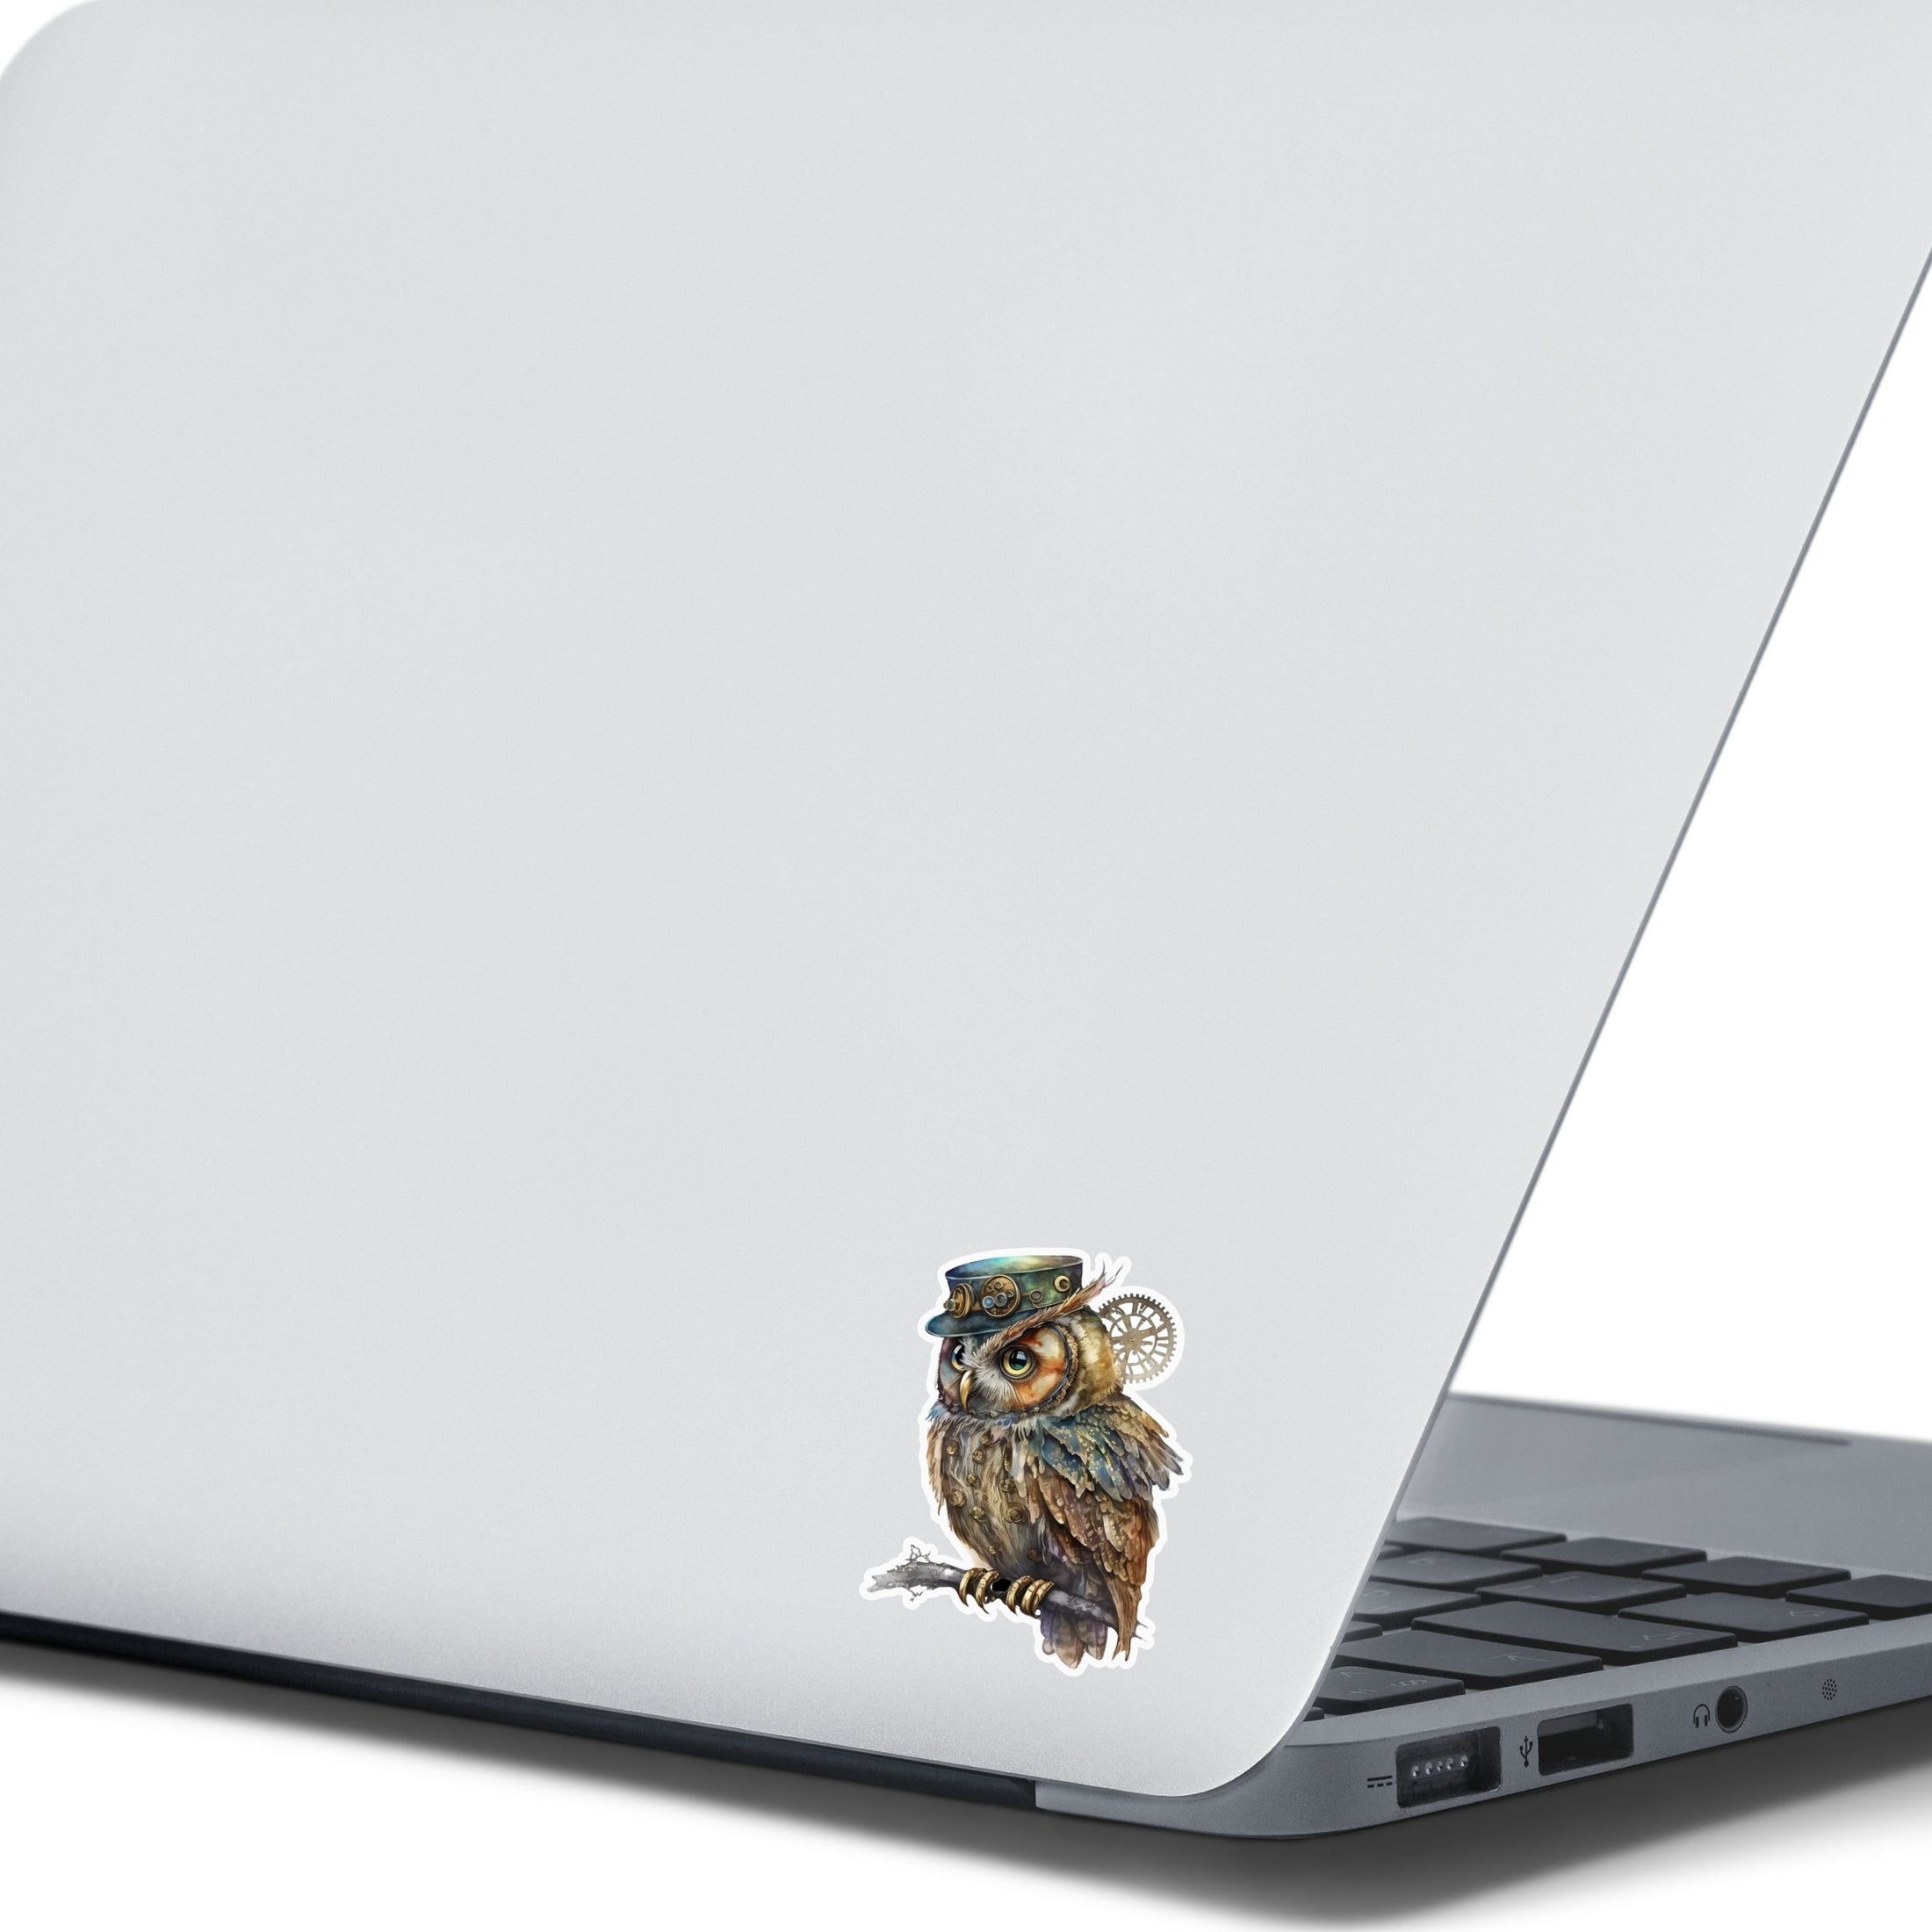 This image shows the steampunk owl sticker on the back of an open laptop.